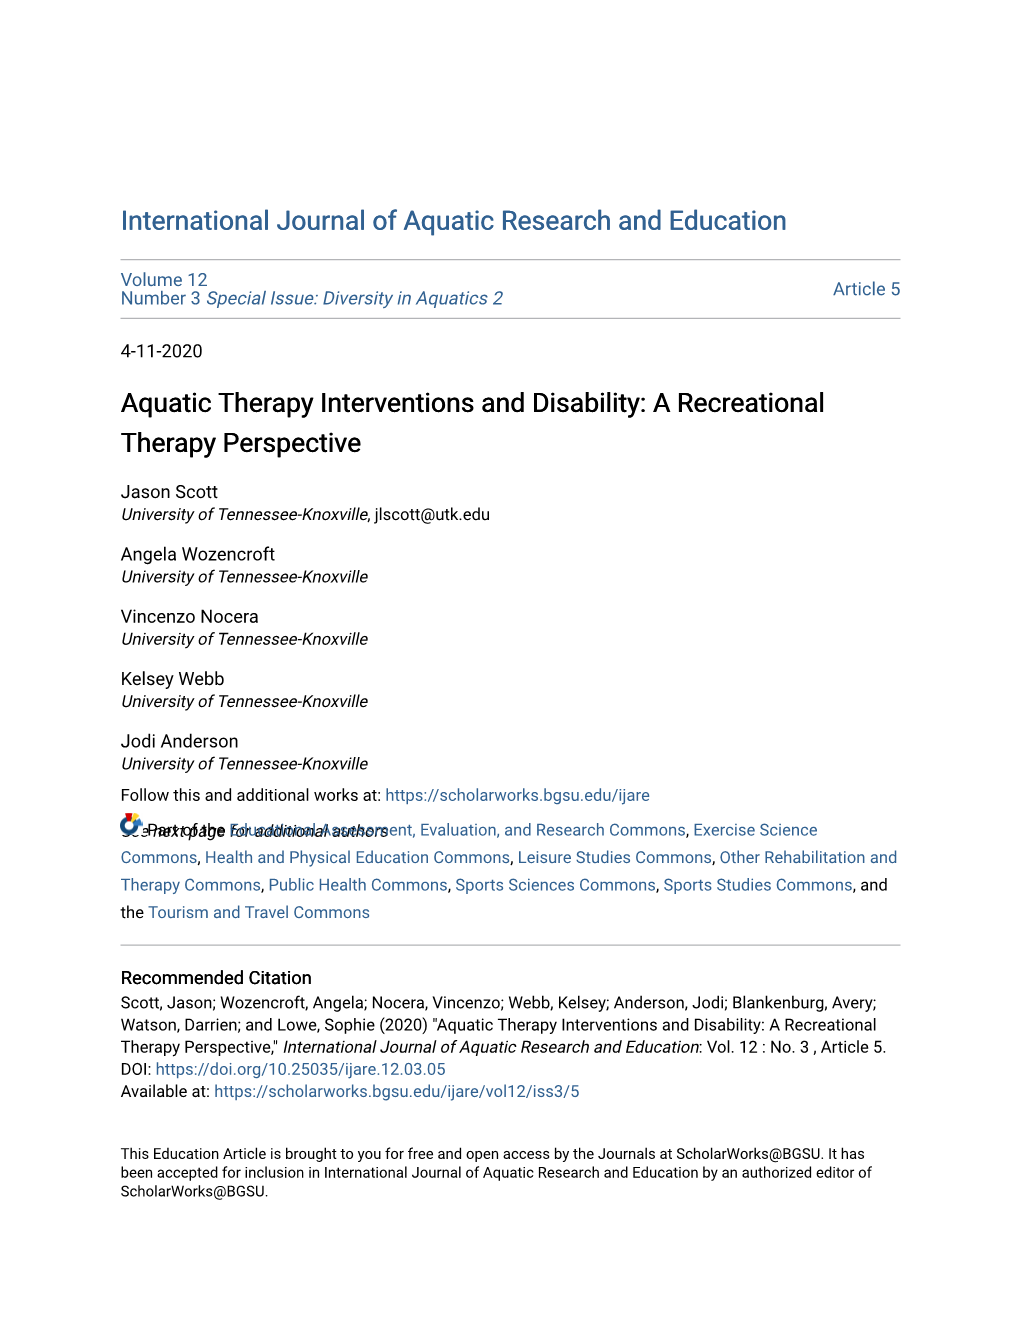 Aquatic Therapy Interventions and Disability: a Recreational Therapy Perspective